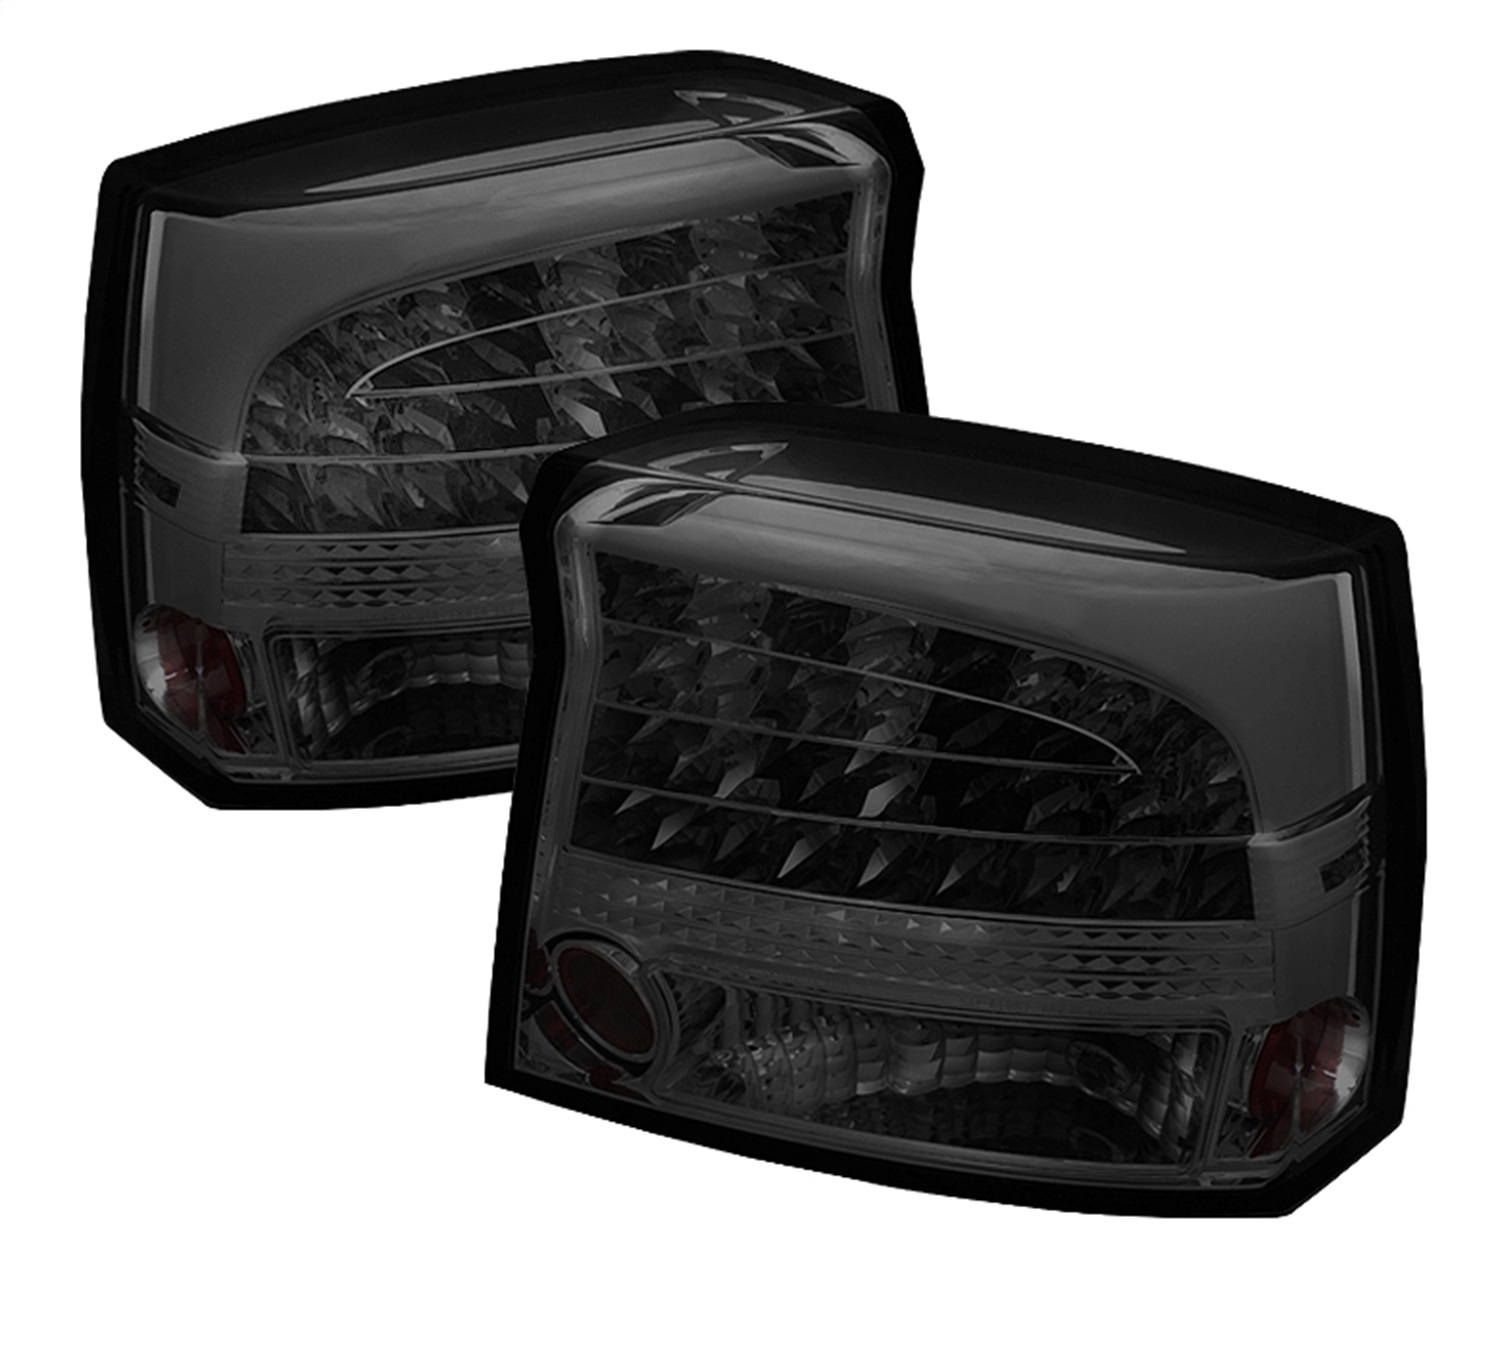 Spyder Auto 5031693 LED Tail Lights Fits 09-10 Charger